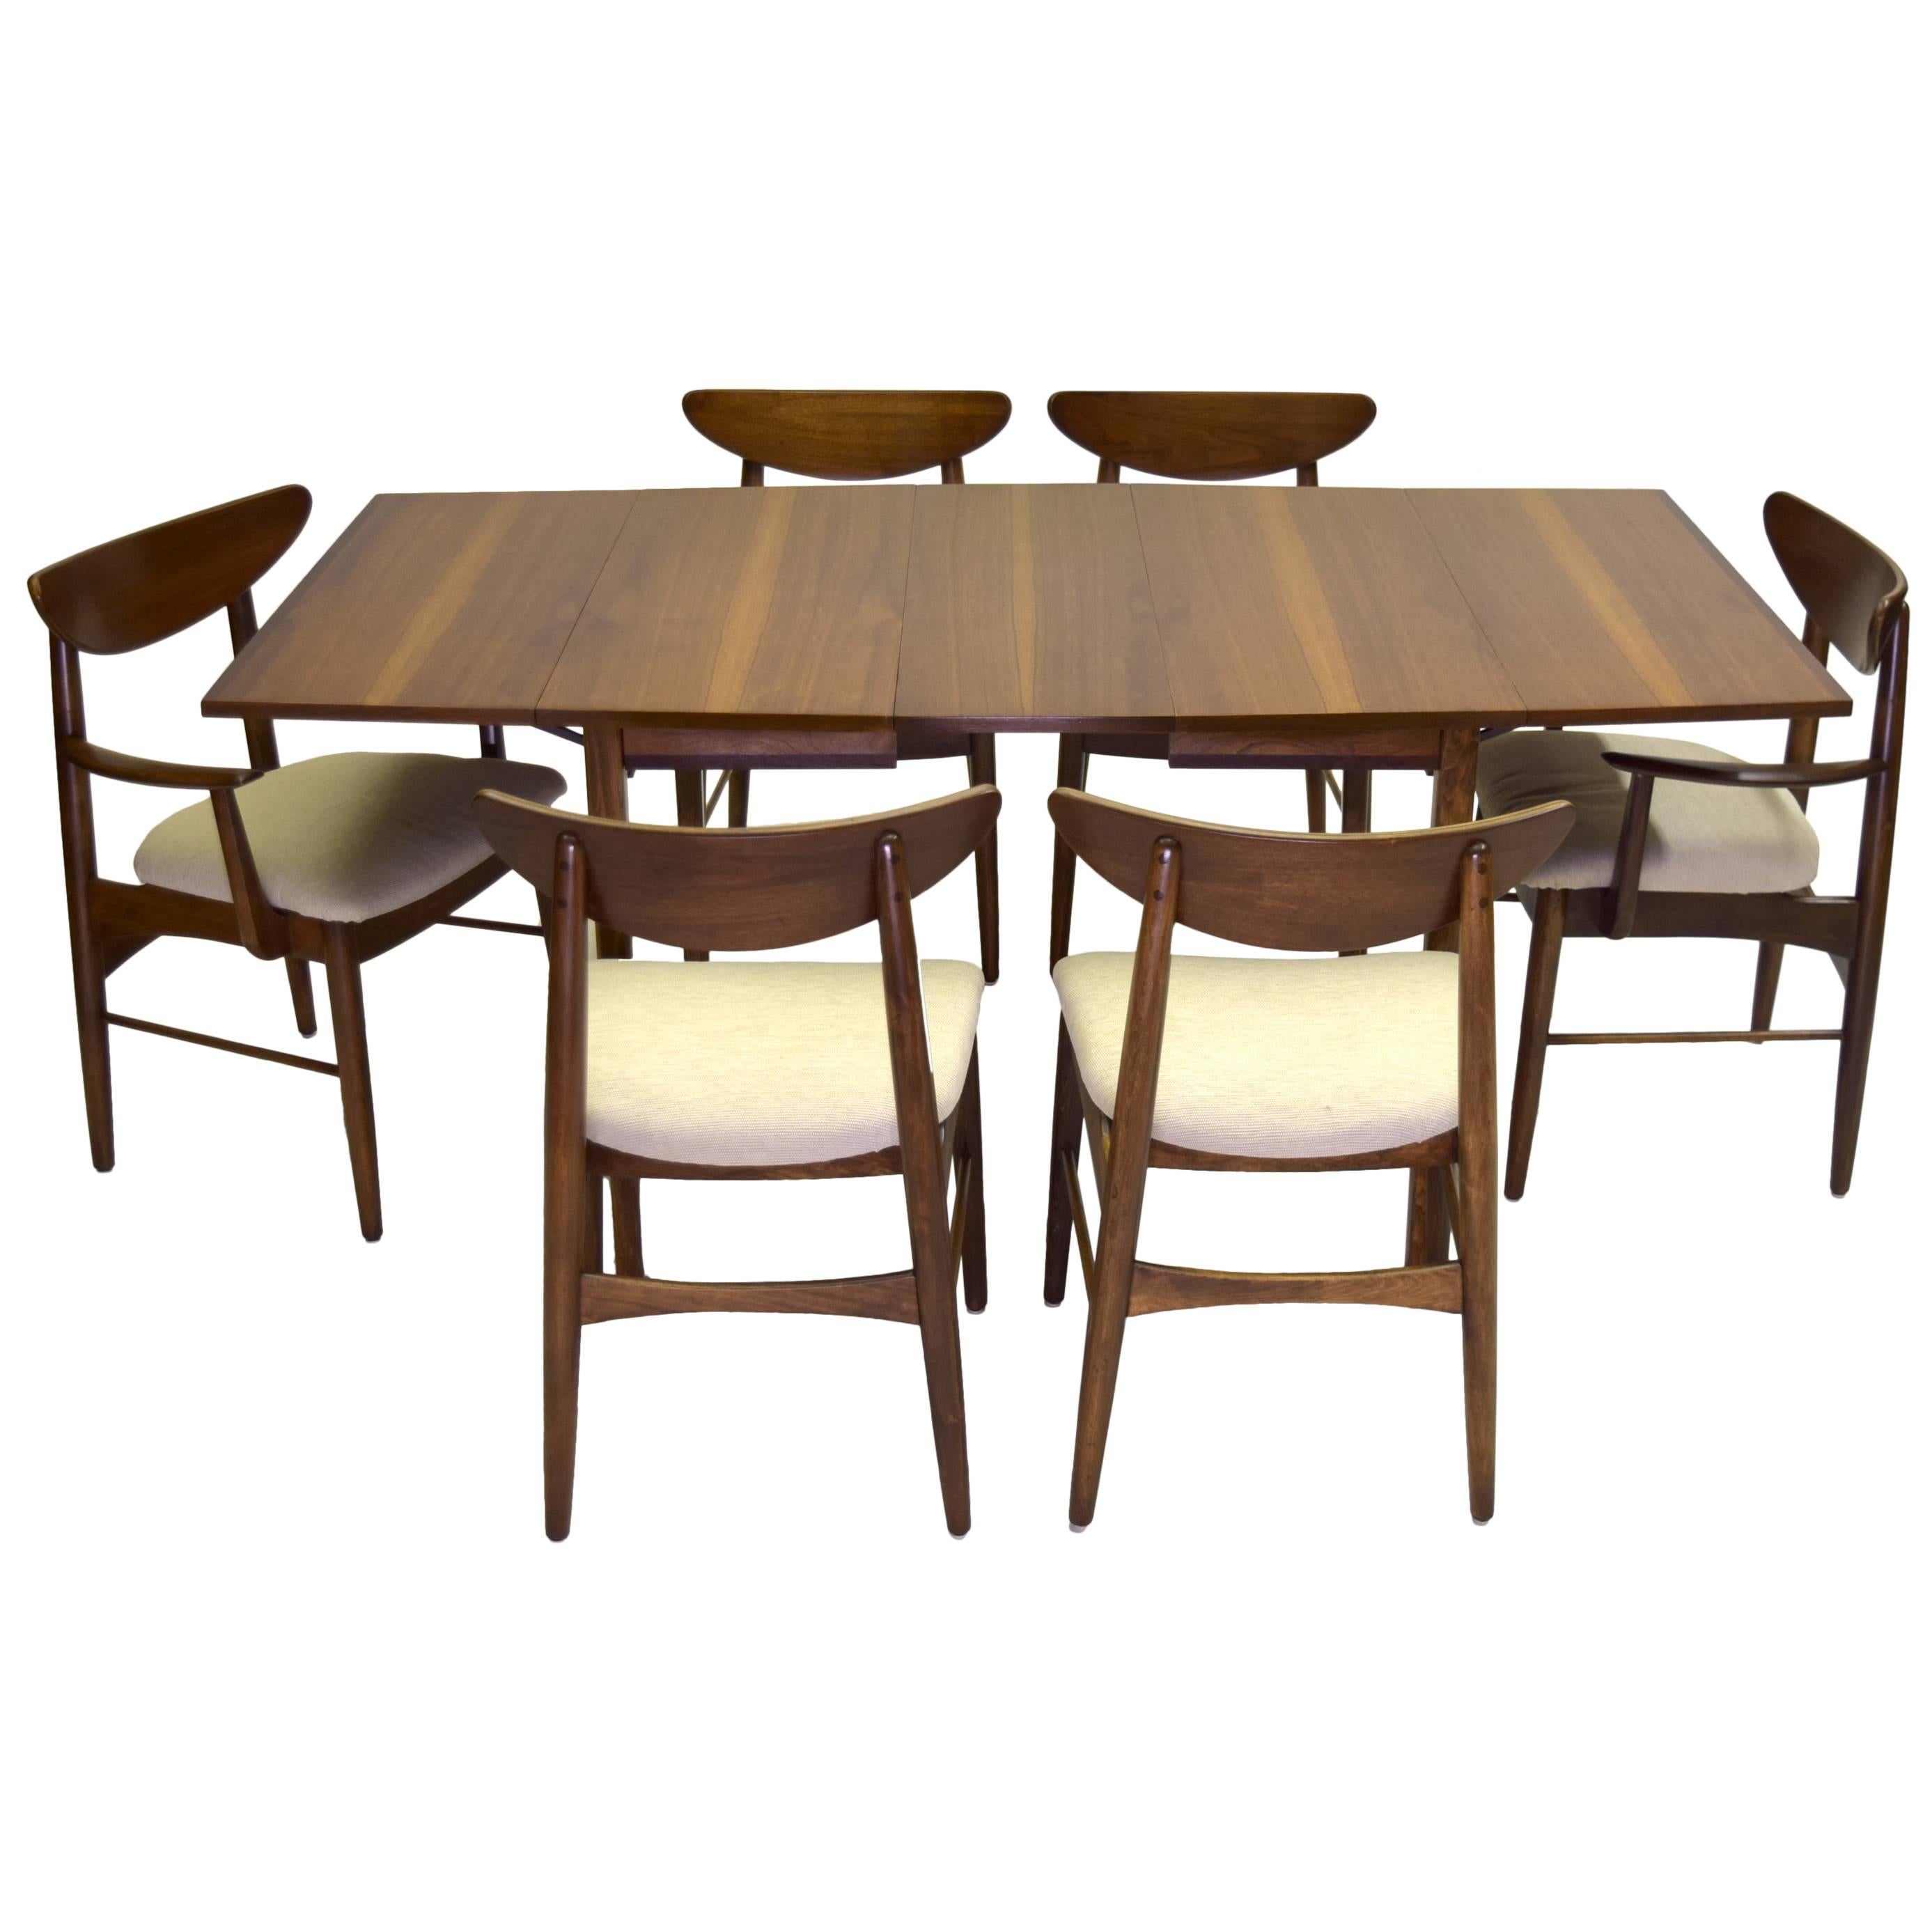 Designed by Pierre Debs for Stanley Furniture in the 1960s.

This listing is for 2 captain / arm chairs, 4 regular chairs, dining table with extension leaf and the china cabinet / hutch buffet, a complete set. This design is exceptionally well